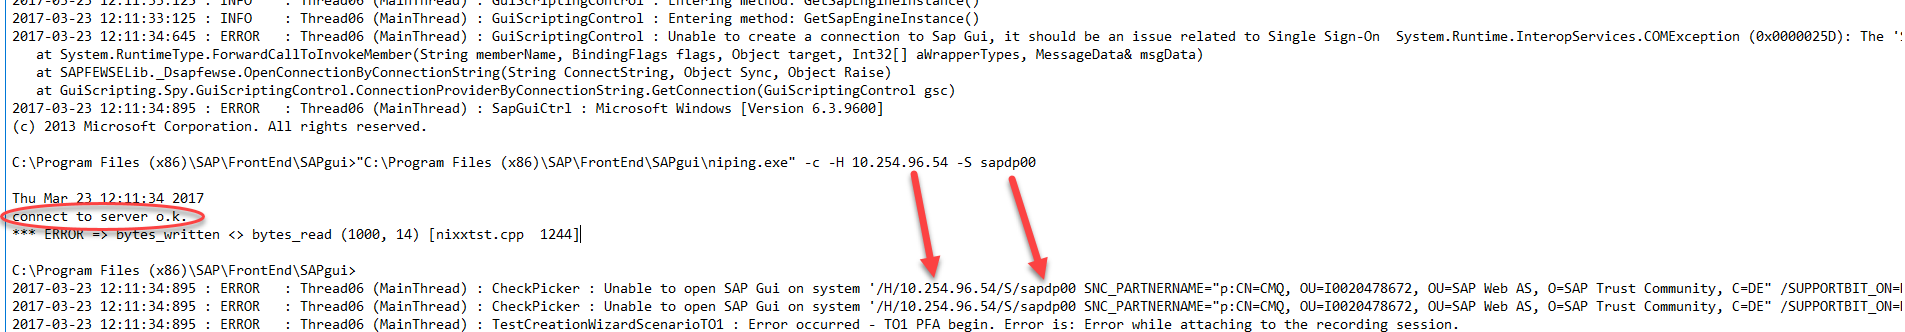 niping okay but SNC still fails  - note for CBTA to ignore the SNC settings.png